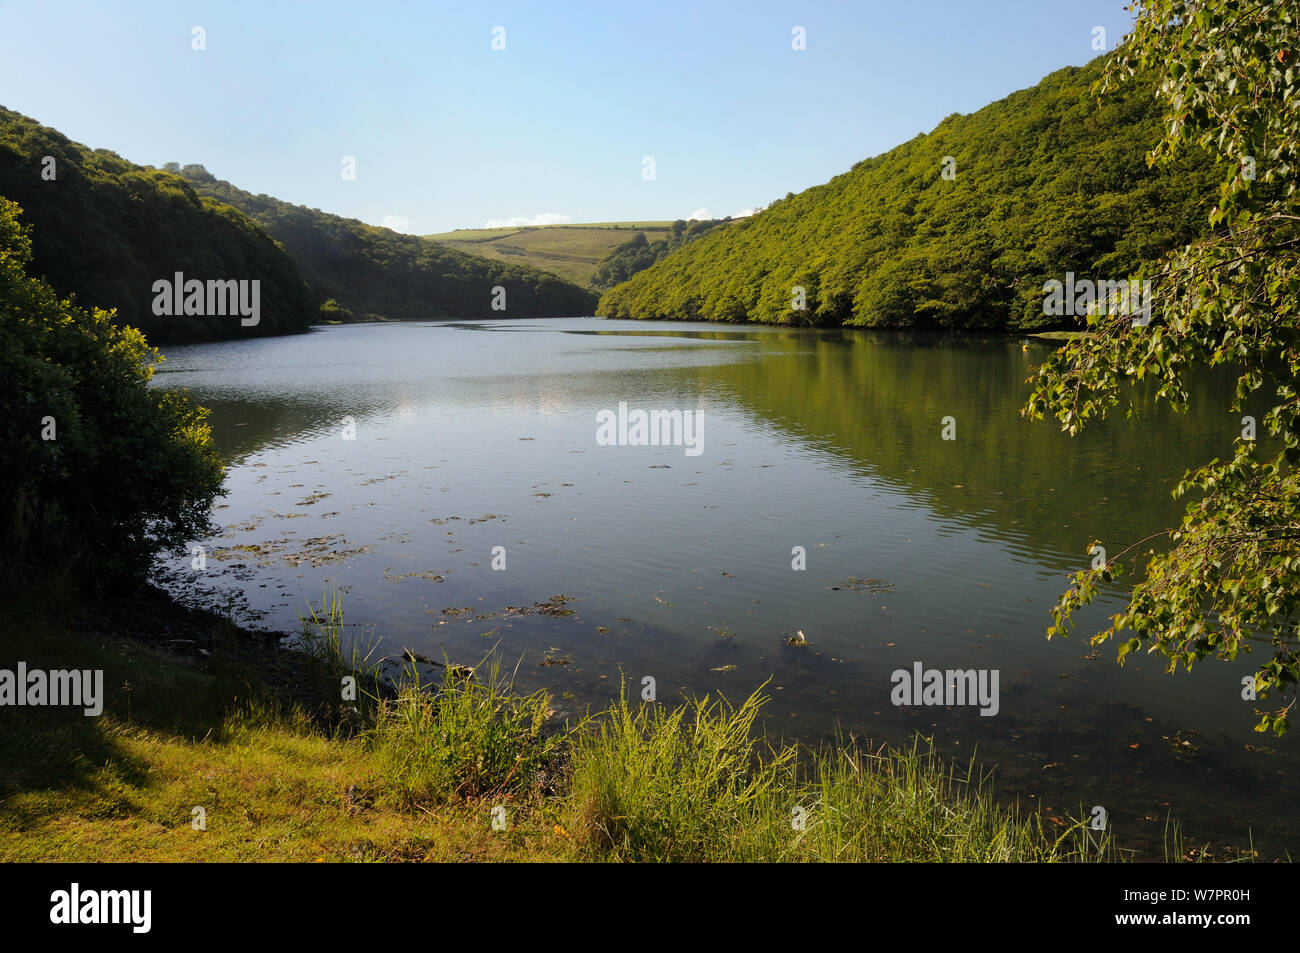 Looe river estuary at high tide with heavily wooded margins, Looe, Cornwall, UK, June 2012 Stock Photo